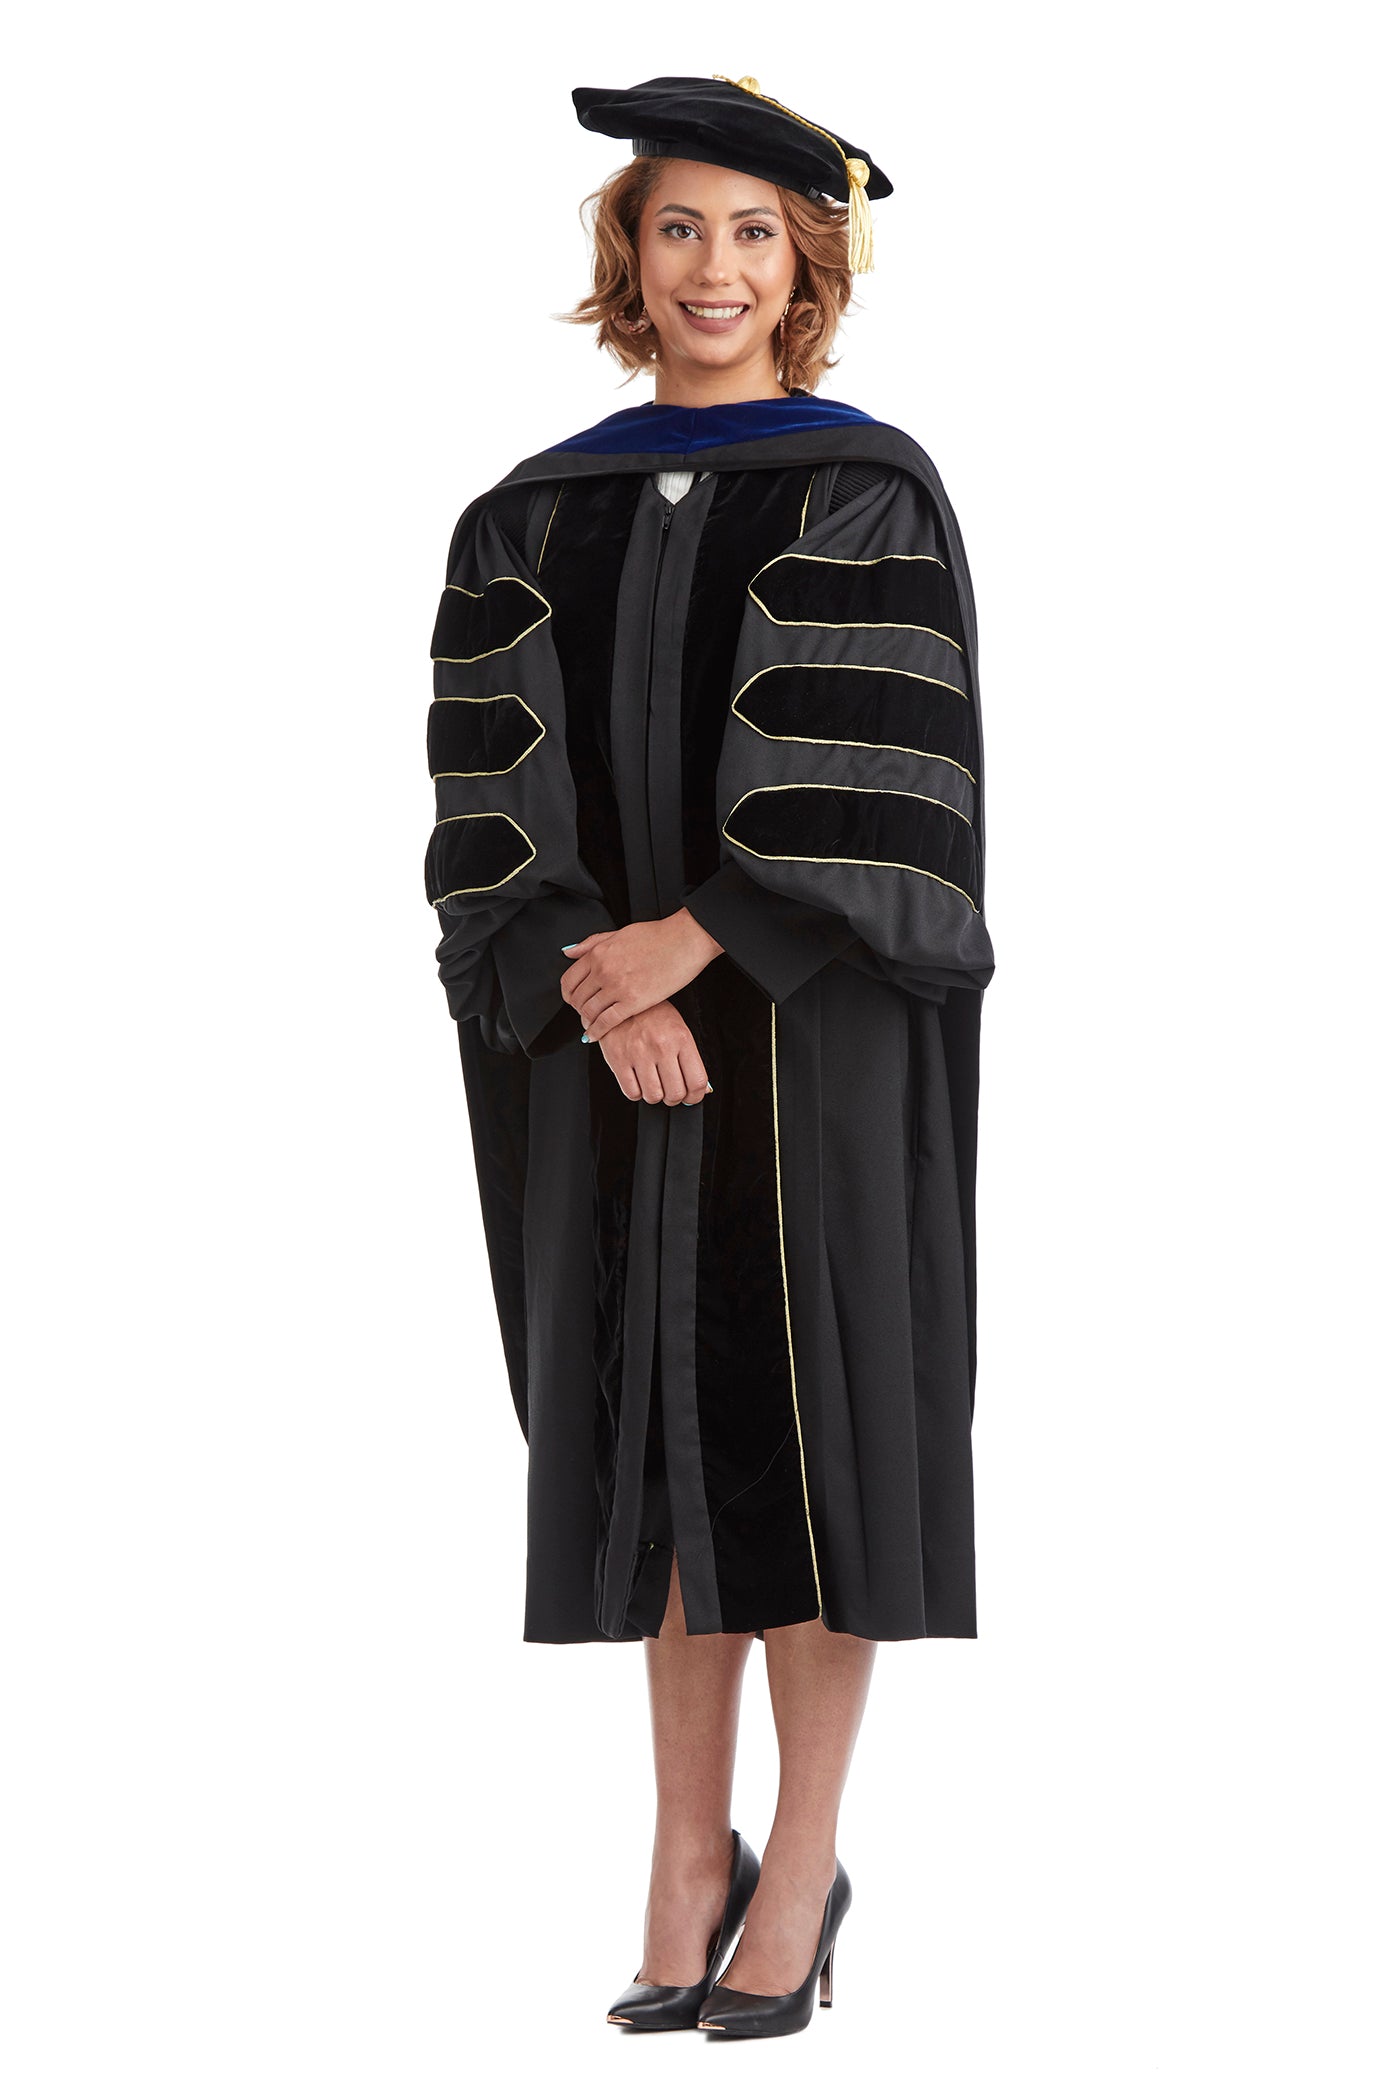 US Military Academy - West Point Doctoral Regalia Rental for Graduation